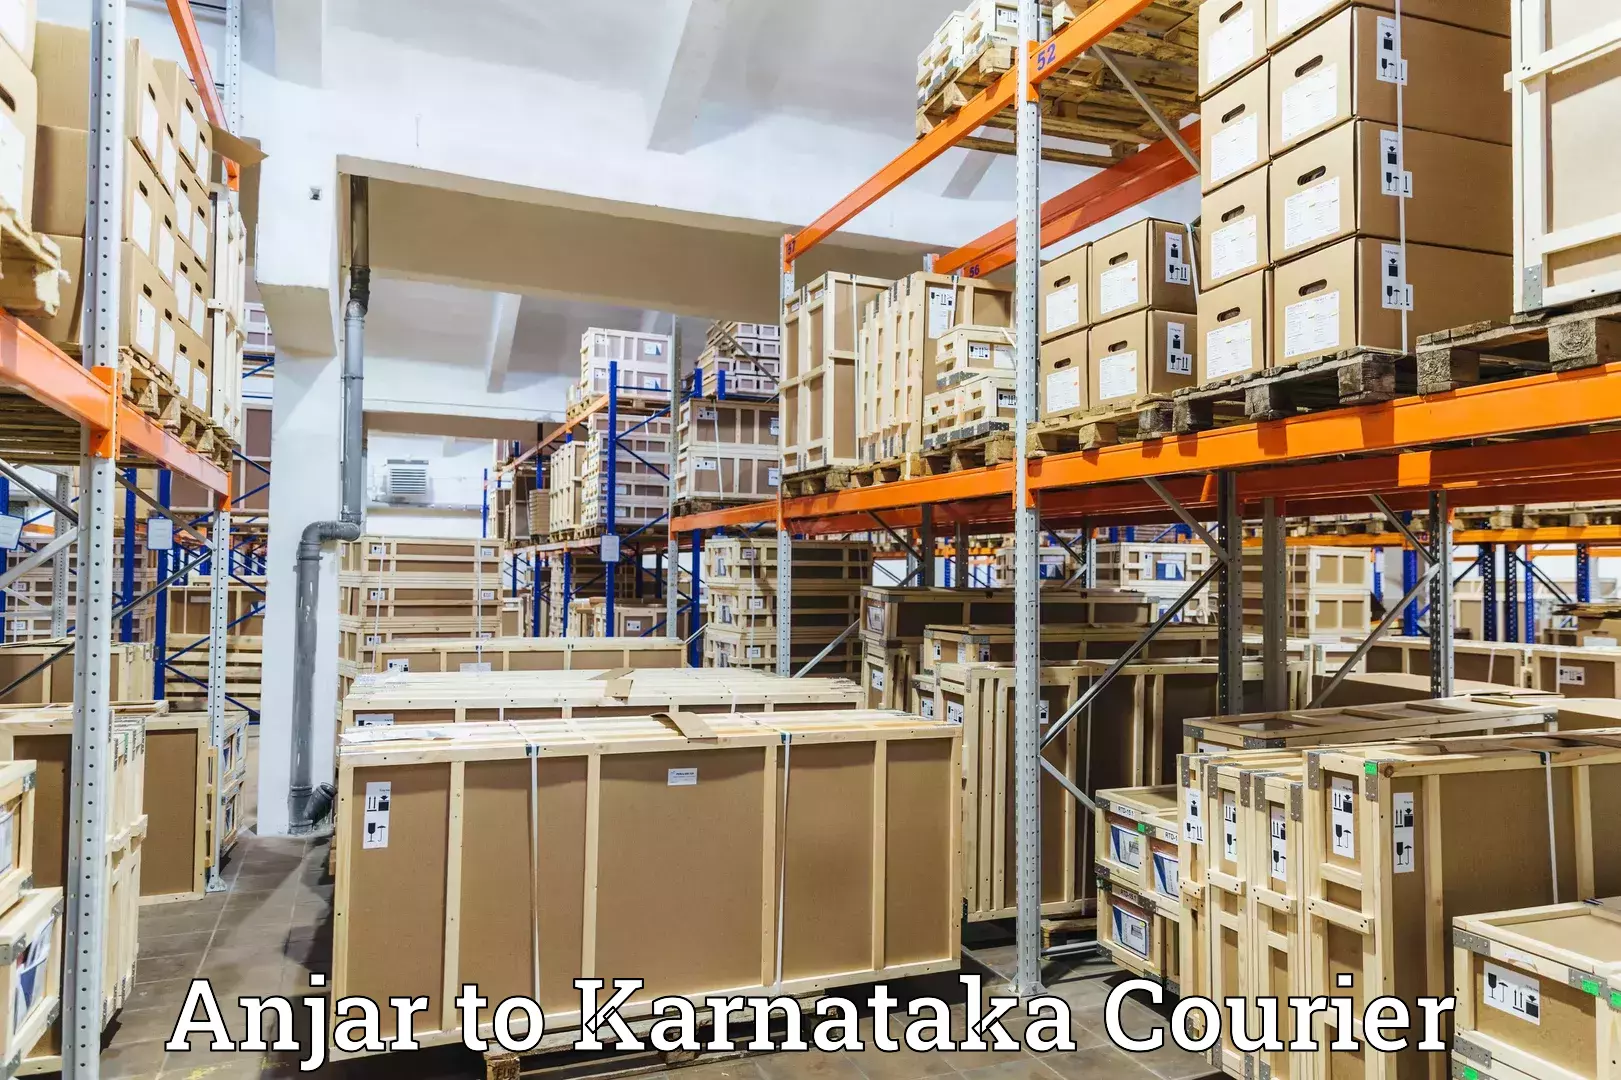 State-of-the-art courier technology Anjar to Devanahalli